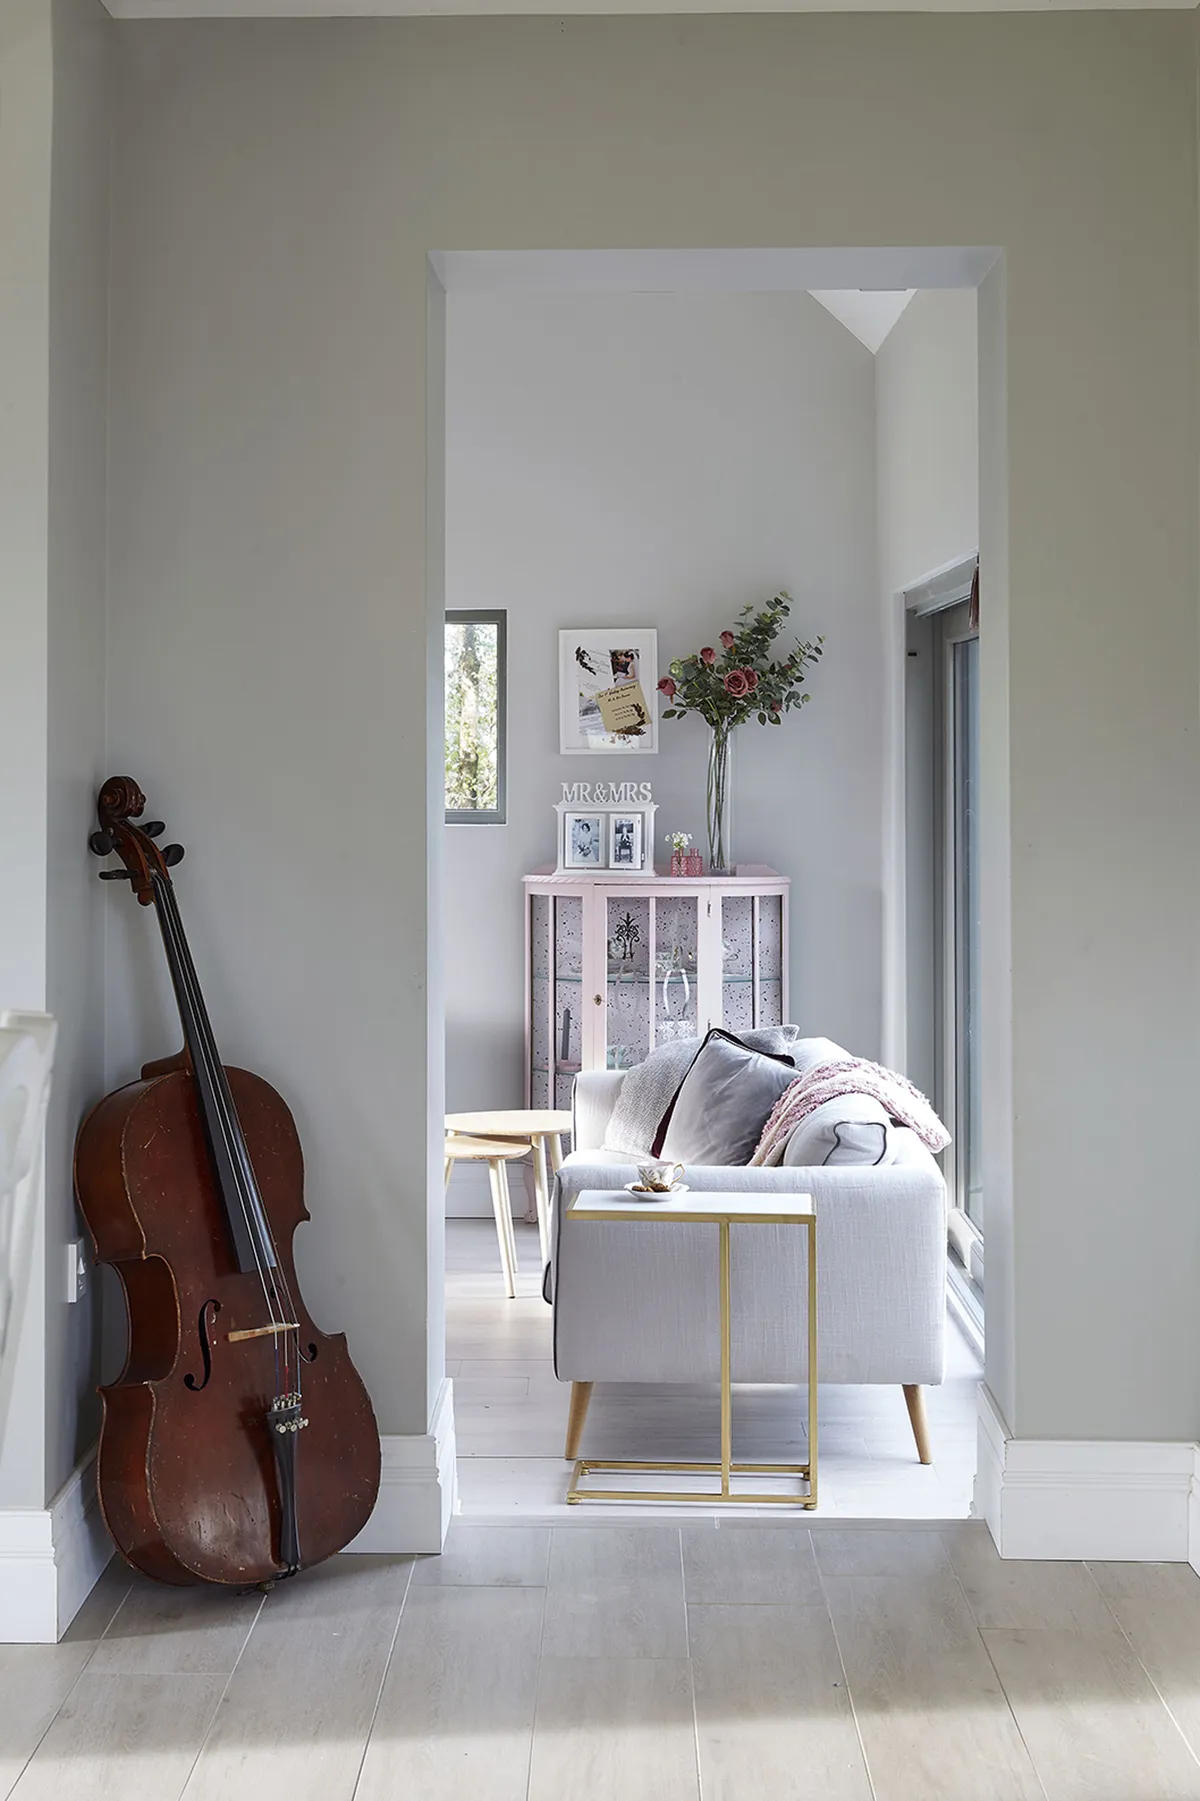 A vintage cello displayed alongside a sleek gold side table is a prime example of Gillian’s savvy mixing of styles